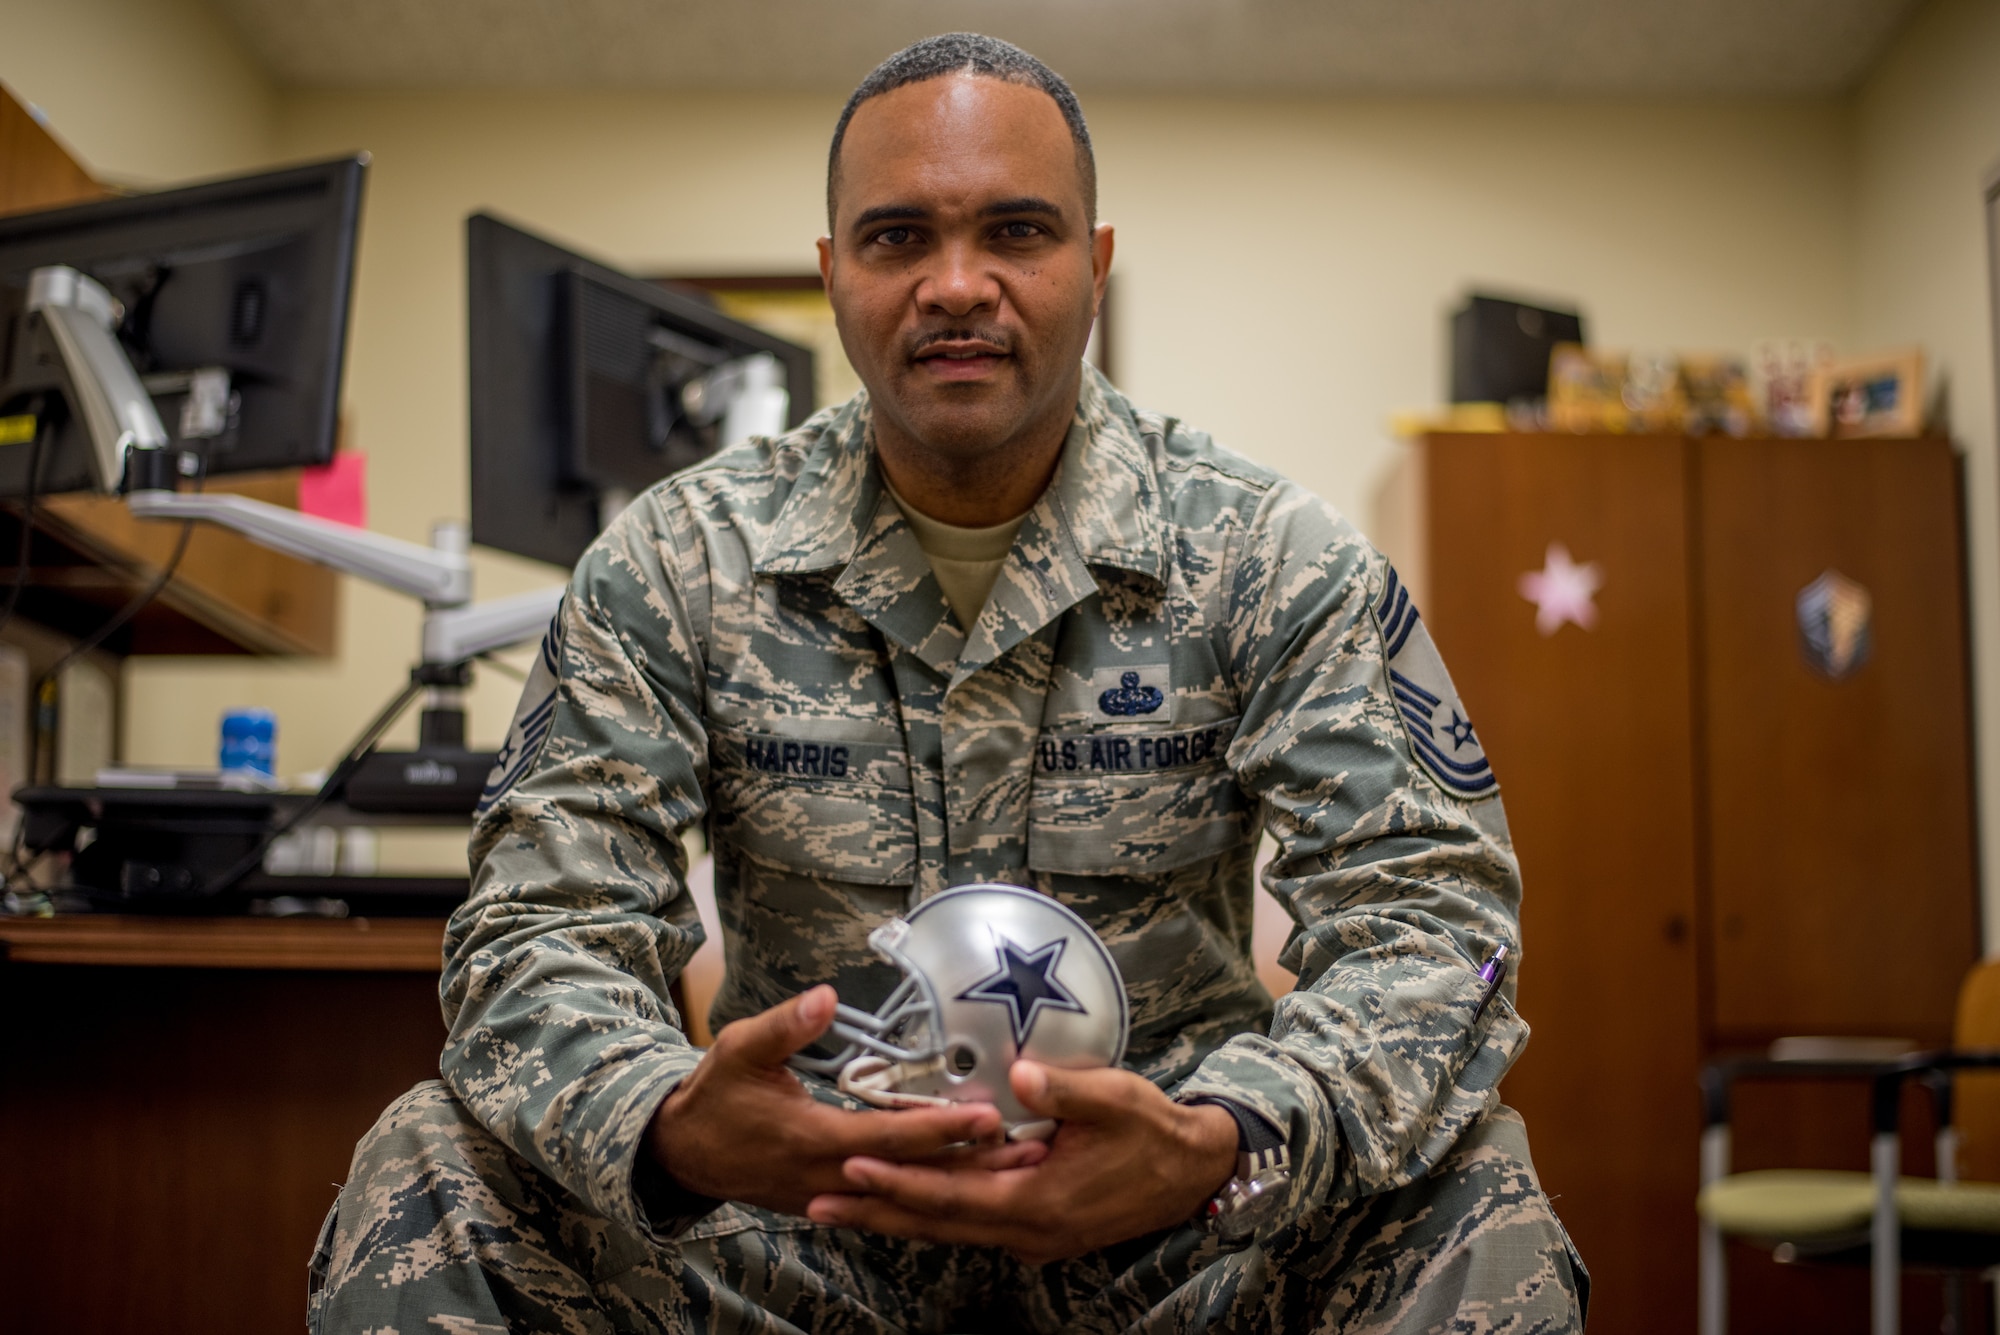 Chief Master Sgt. Anthony Harris, 512 Airlift Wing Force Support Squadron superintendent, poses for a photo in his office at Dover Air Force Base, Delaware, Nov. 24, 2018. Harris played football until his first year of college, learning disciple and resilience that helps him execute the wing mission as a chief master sergeant. (U.S. Air Force photo by Staff Sgt. Damien Taylor)